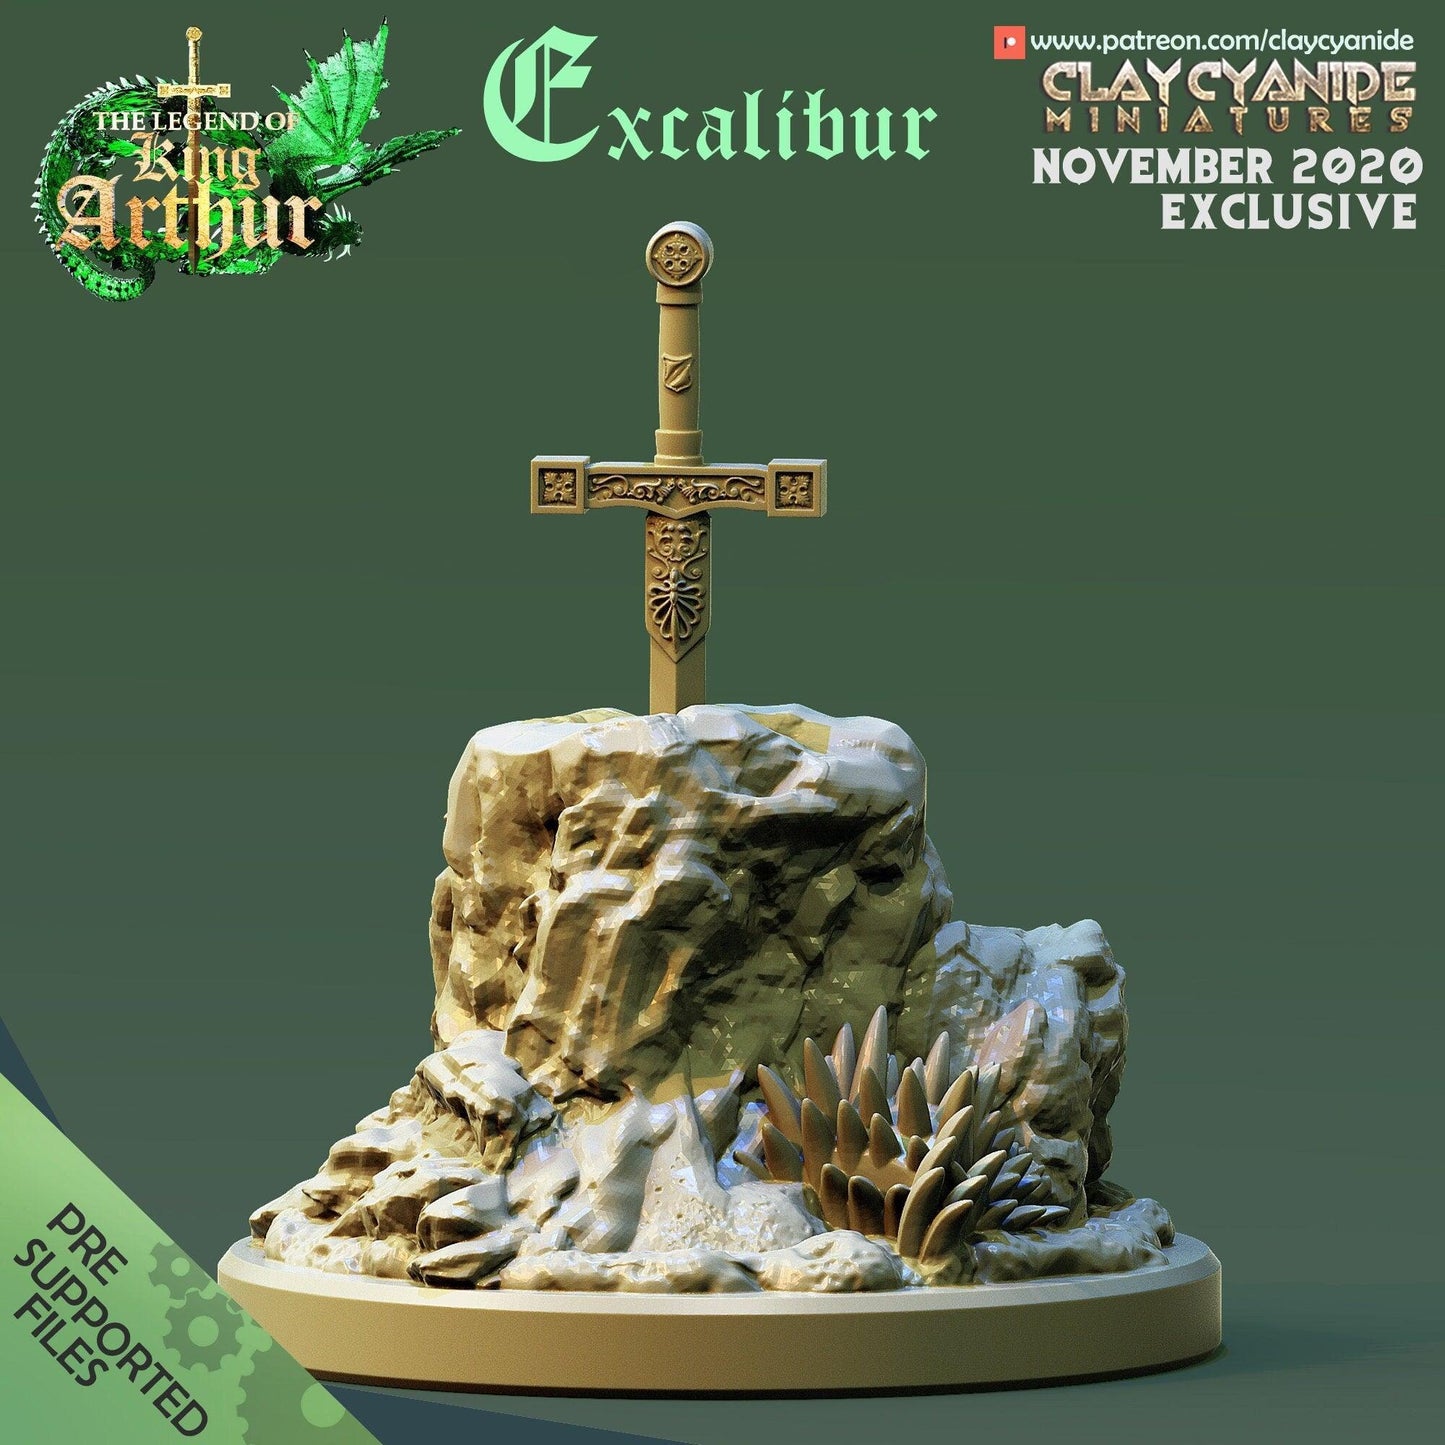 Excalibur Miniature | Clay Cyanide | Legend of King Arthur | Tabletop Gaming | DnD Miniature | Dungeons and Dragons,, DnD 5e - Plague Miniatures shop for DnD Miniatures